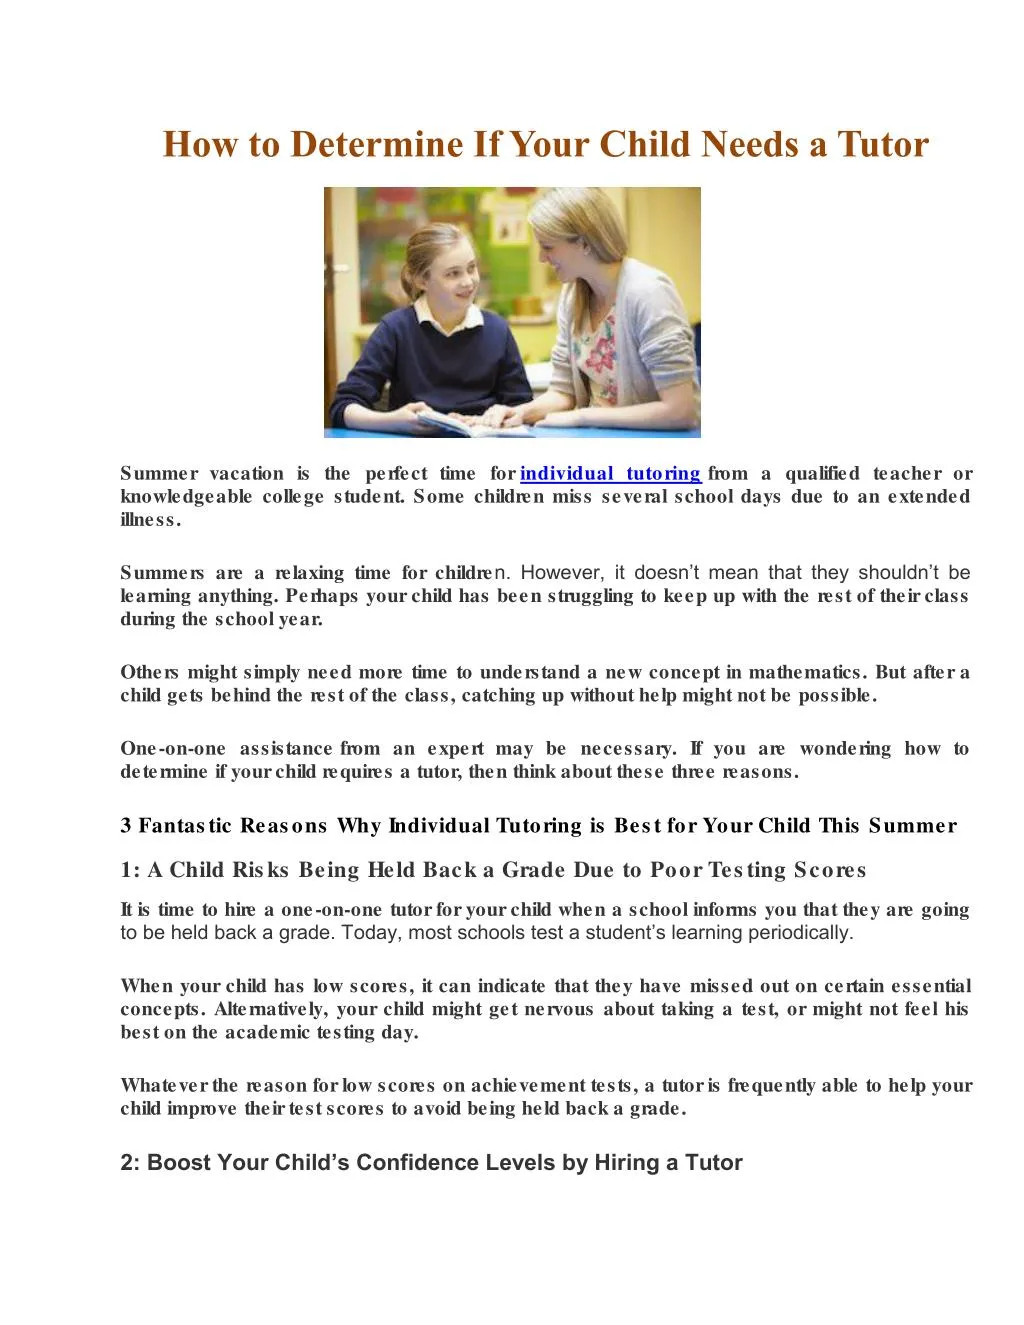 how to determine if your child needs a tutor